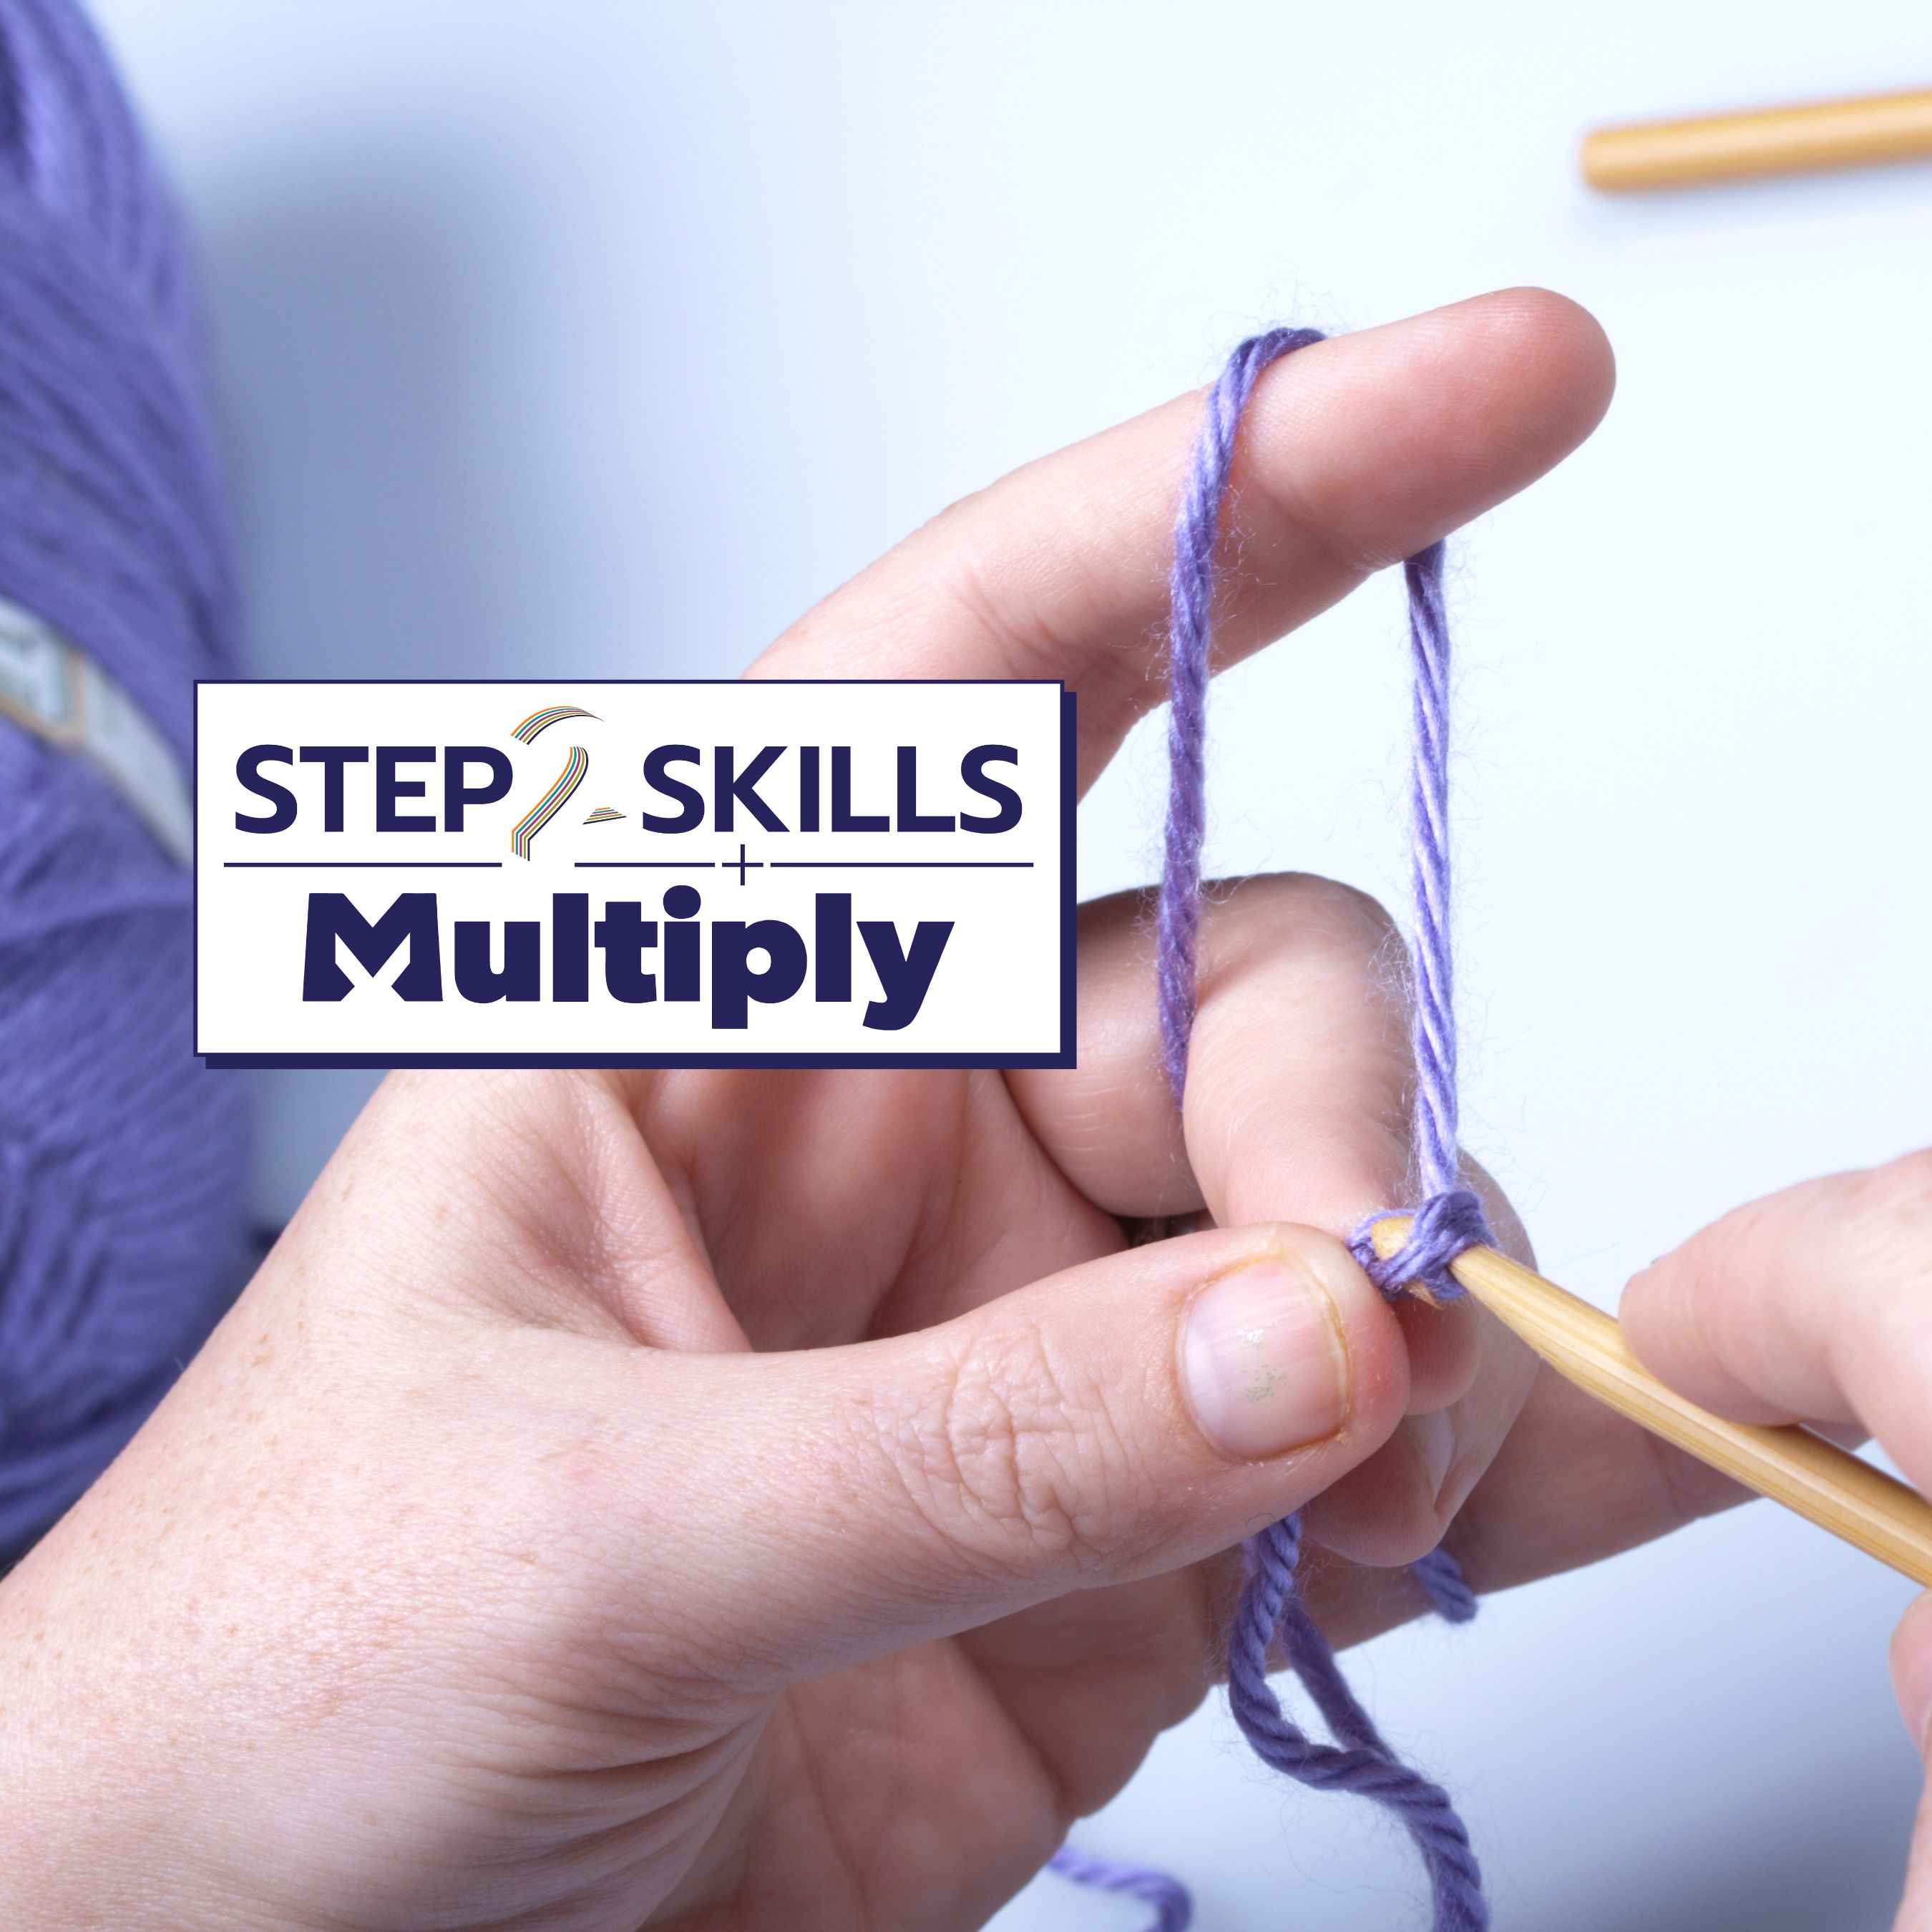 Multiply - Introduction to Crochet